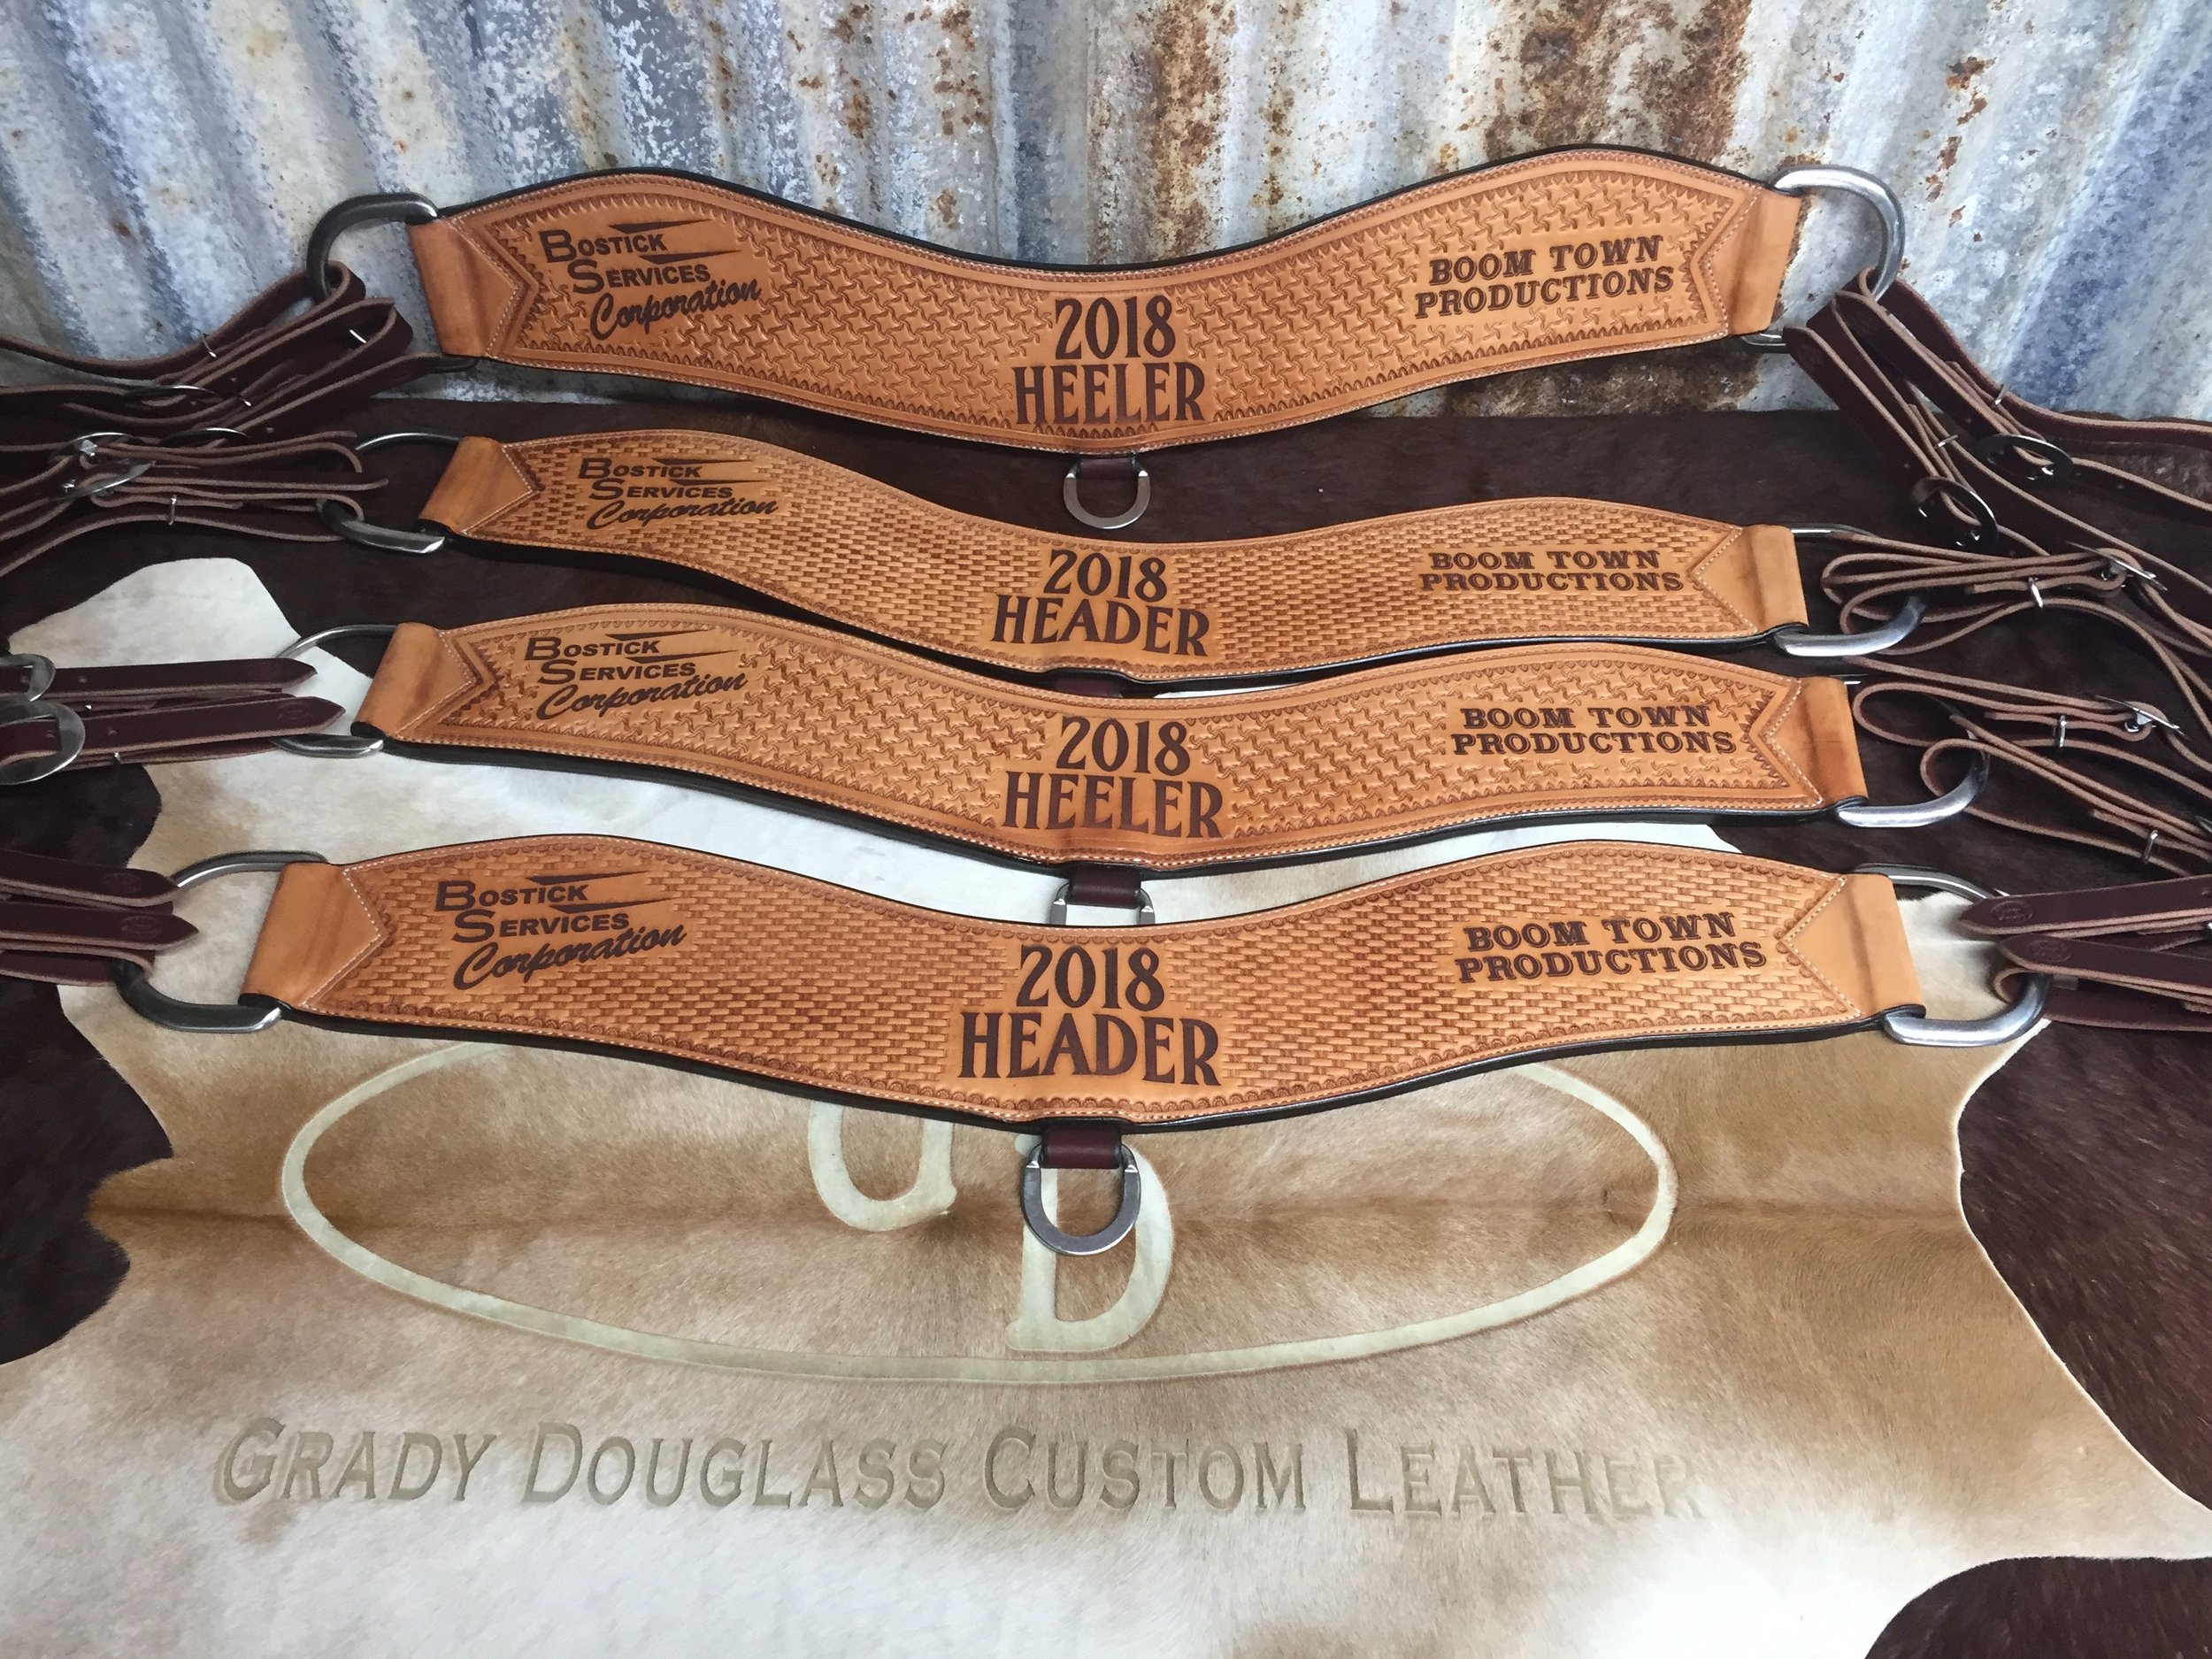 Corporate Gifts & Products — Grady Douglass Custom Leather